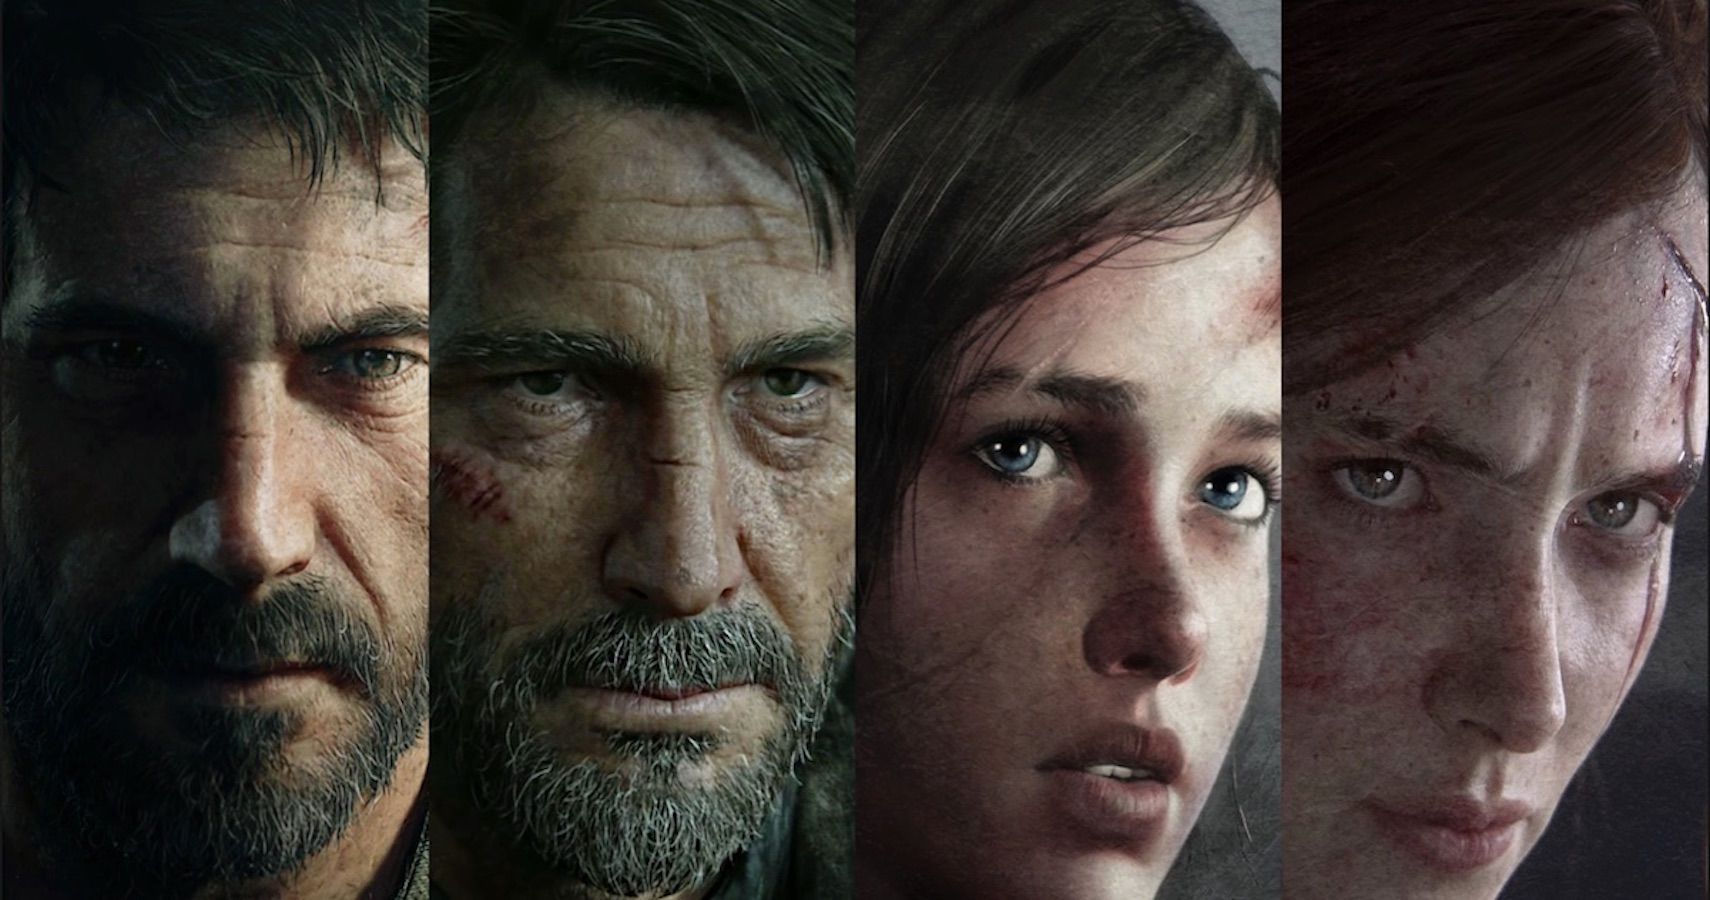 The Last Of Us: Everything About Joel's Past You Didn't Know